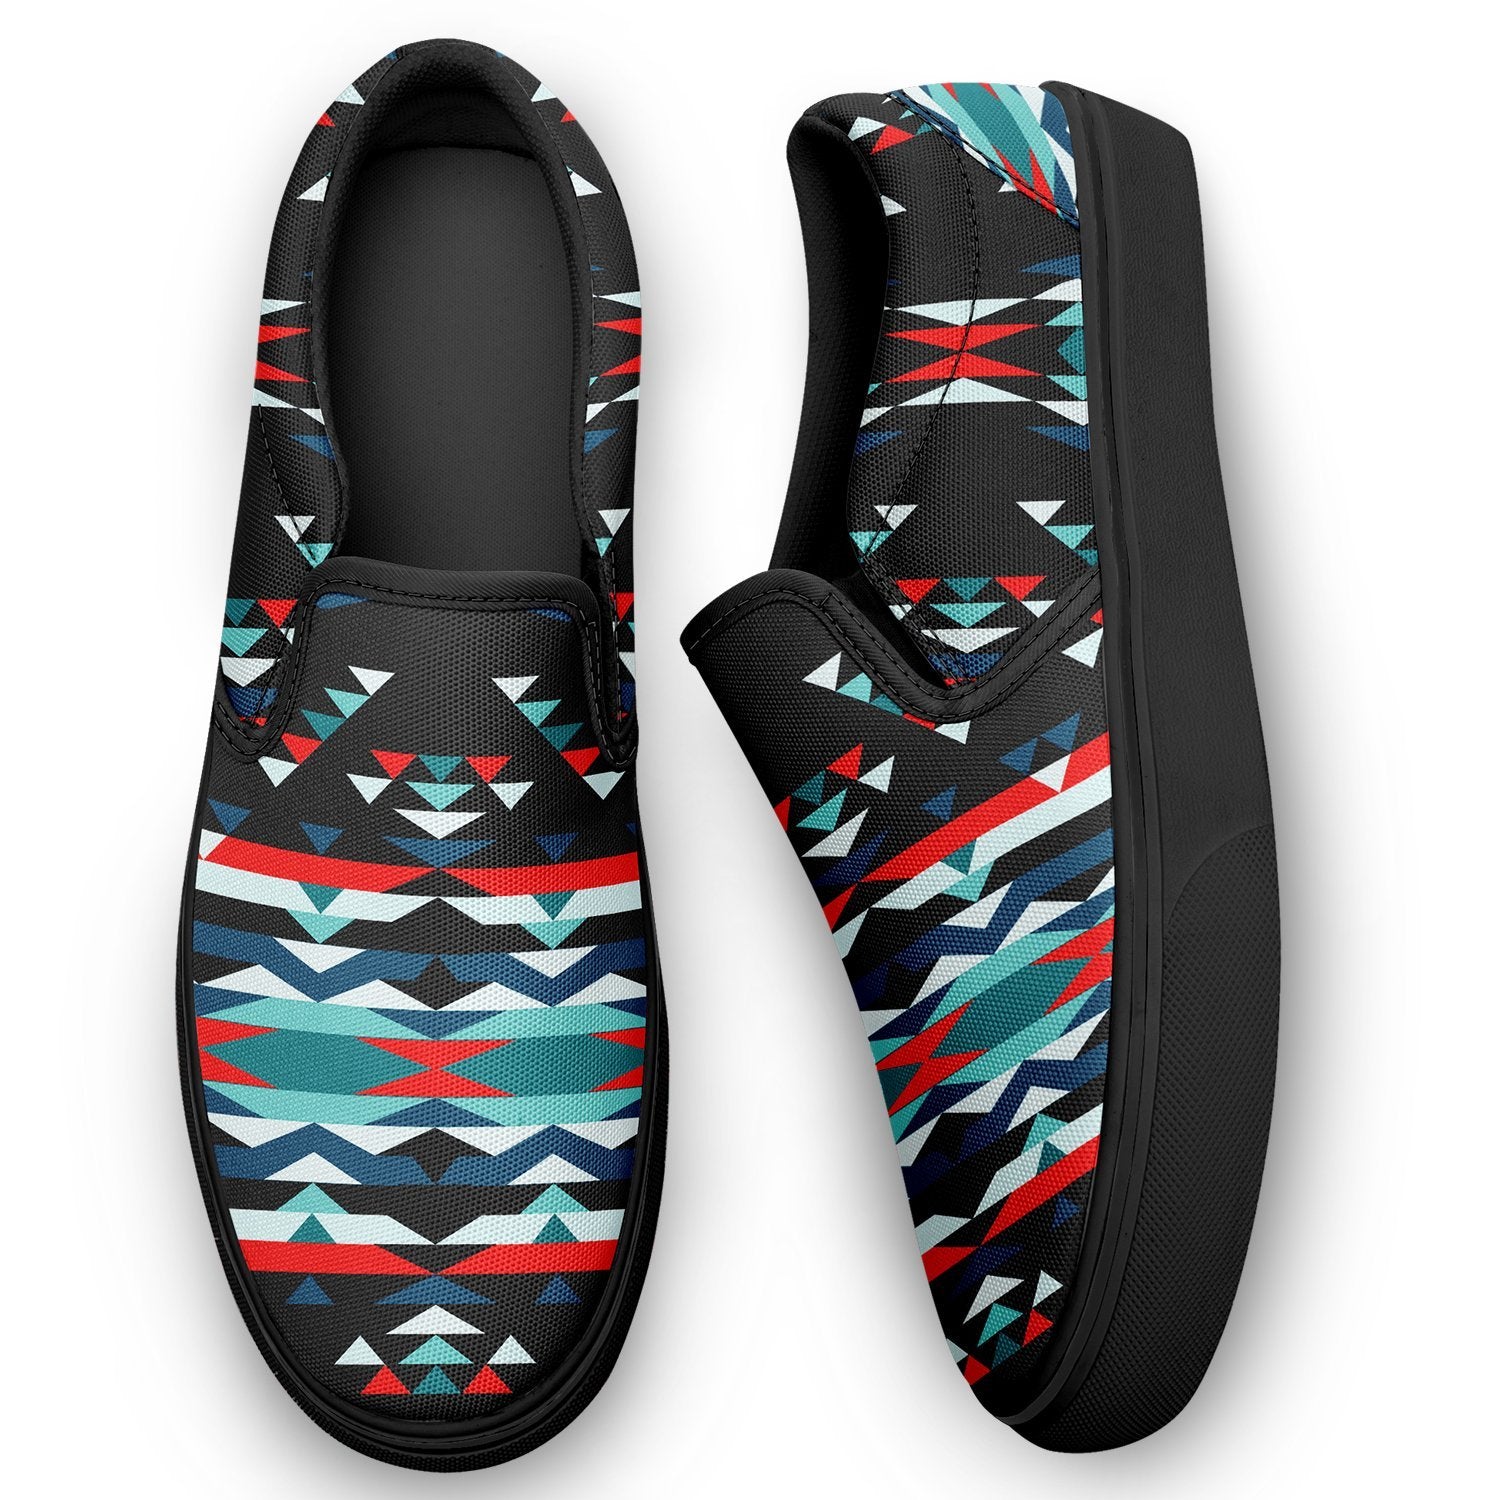 Visions of Peaceful Nights Otoyimm Canvas Slip On Shoes 49 Dzine 